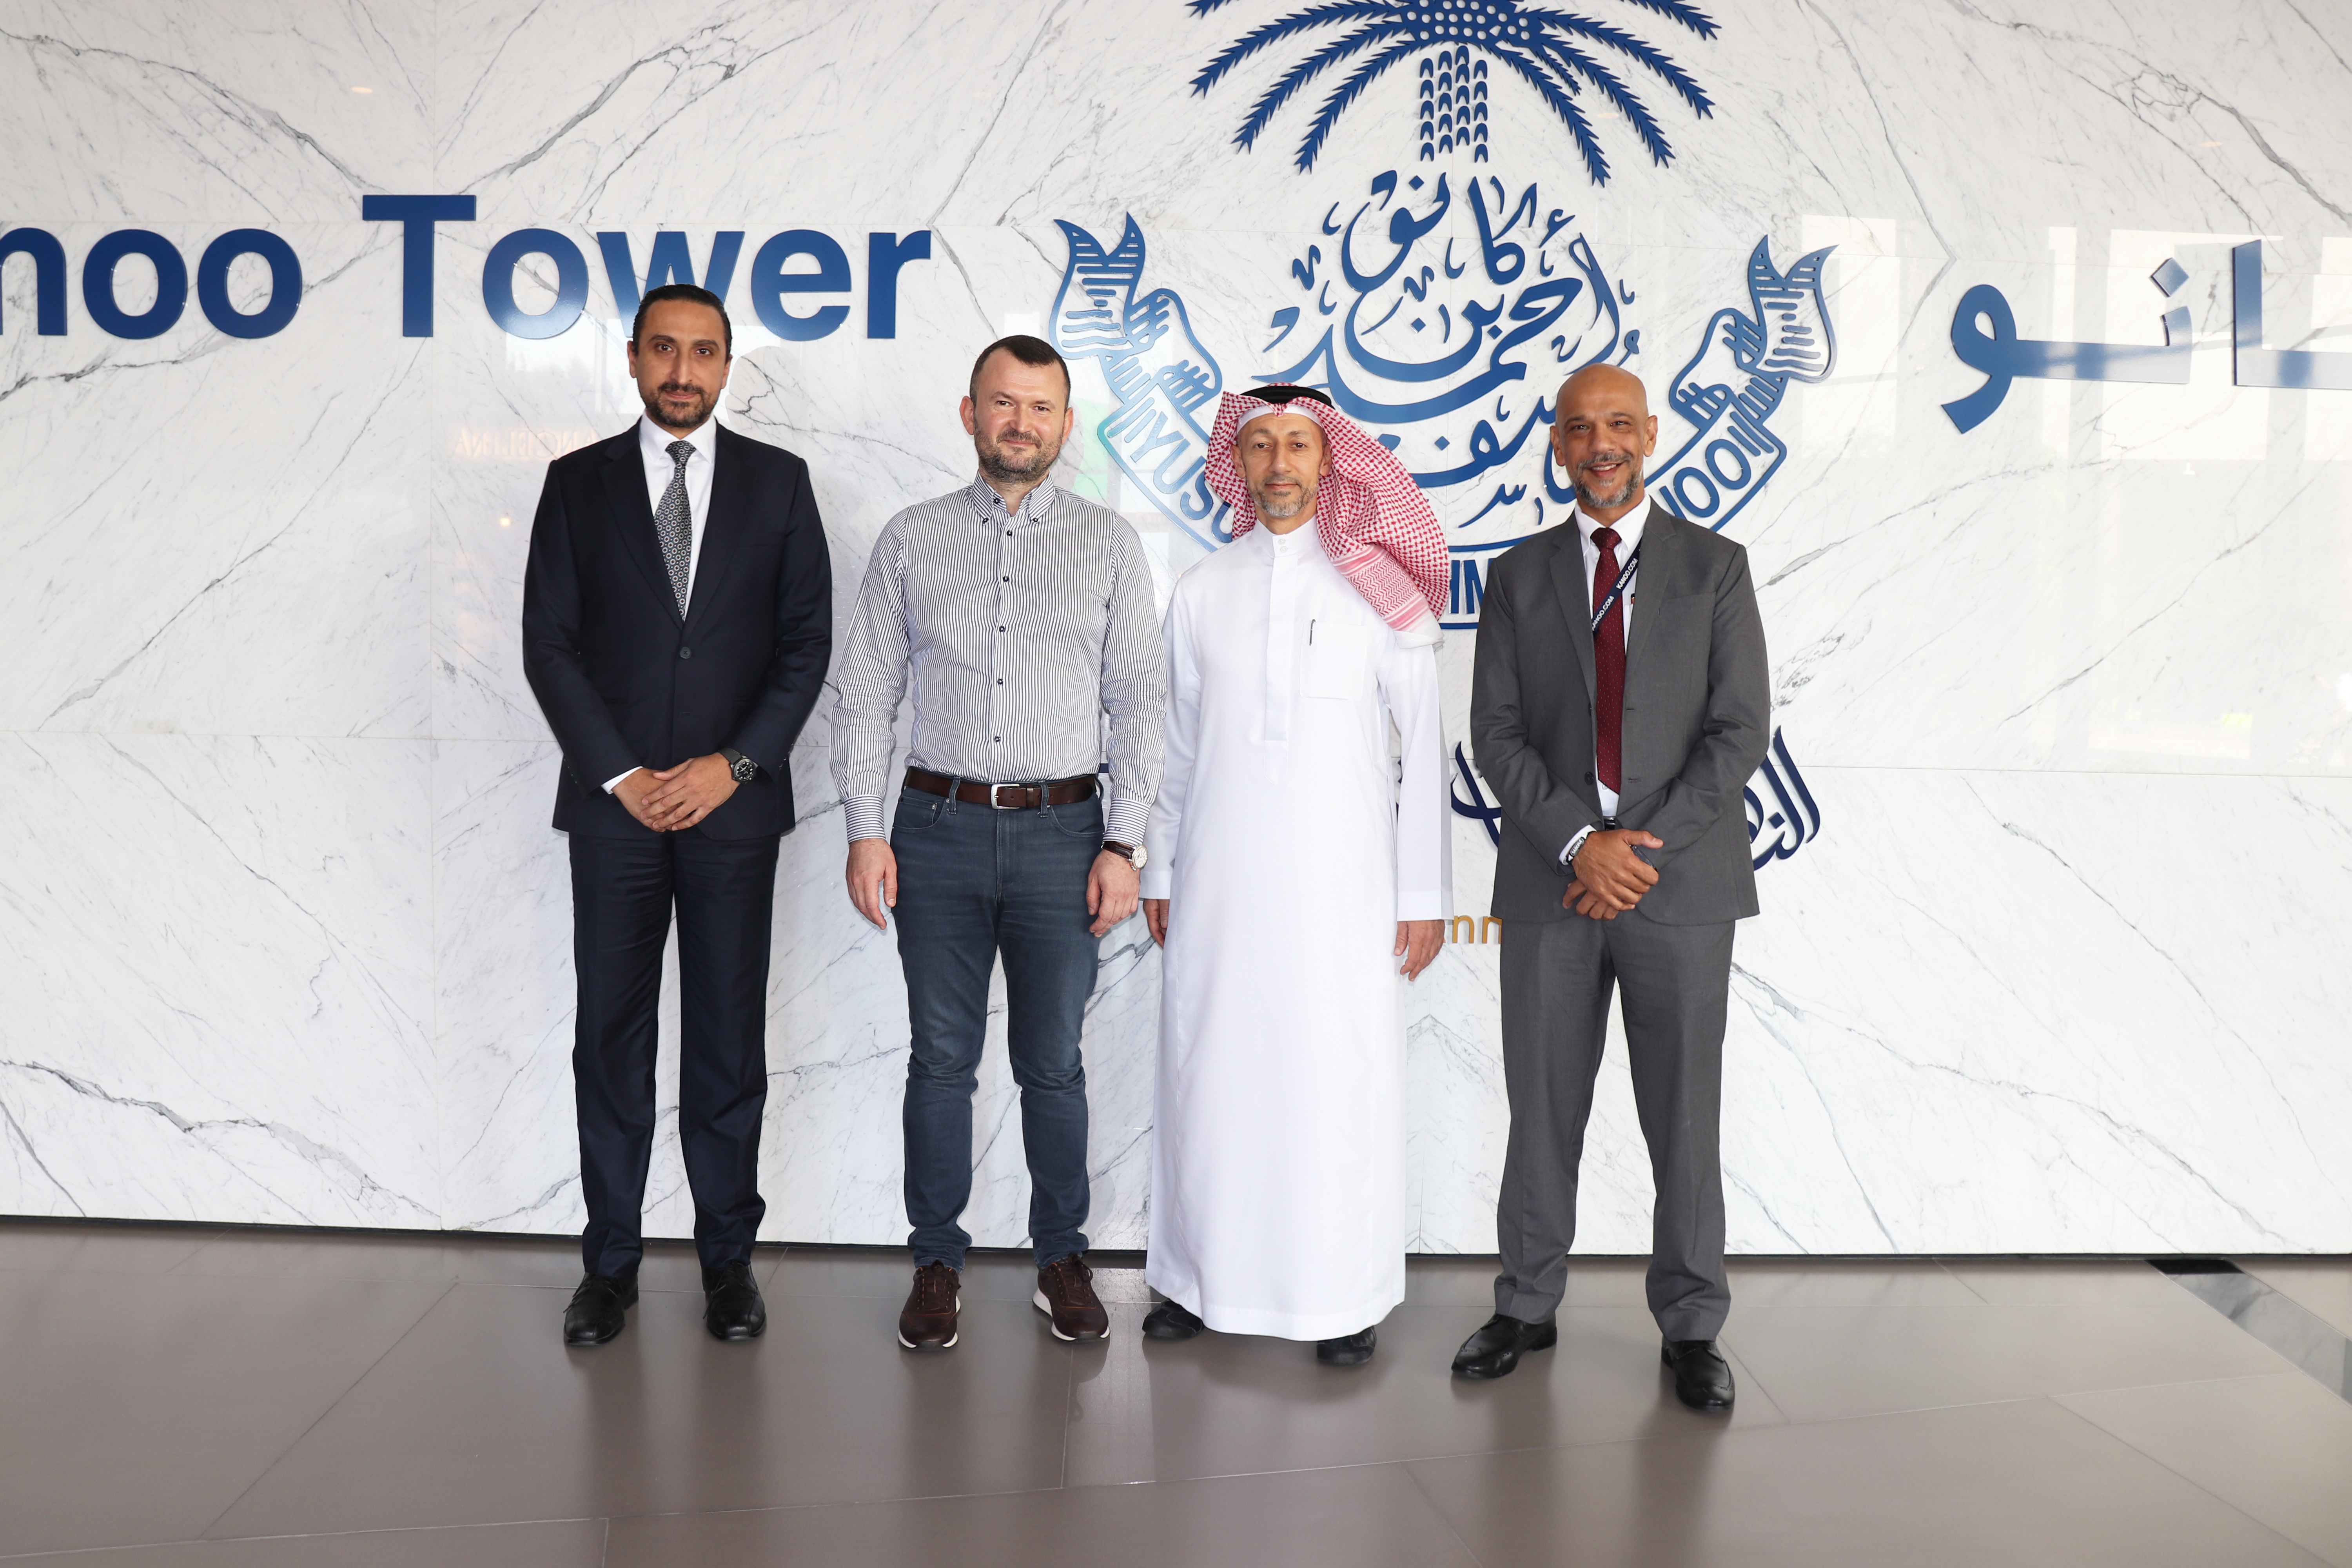 Kanoo Travel chooses dcs plus as partner to support company's digital transformation strategy